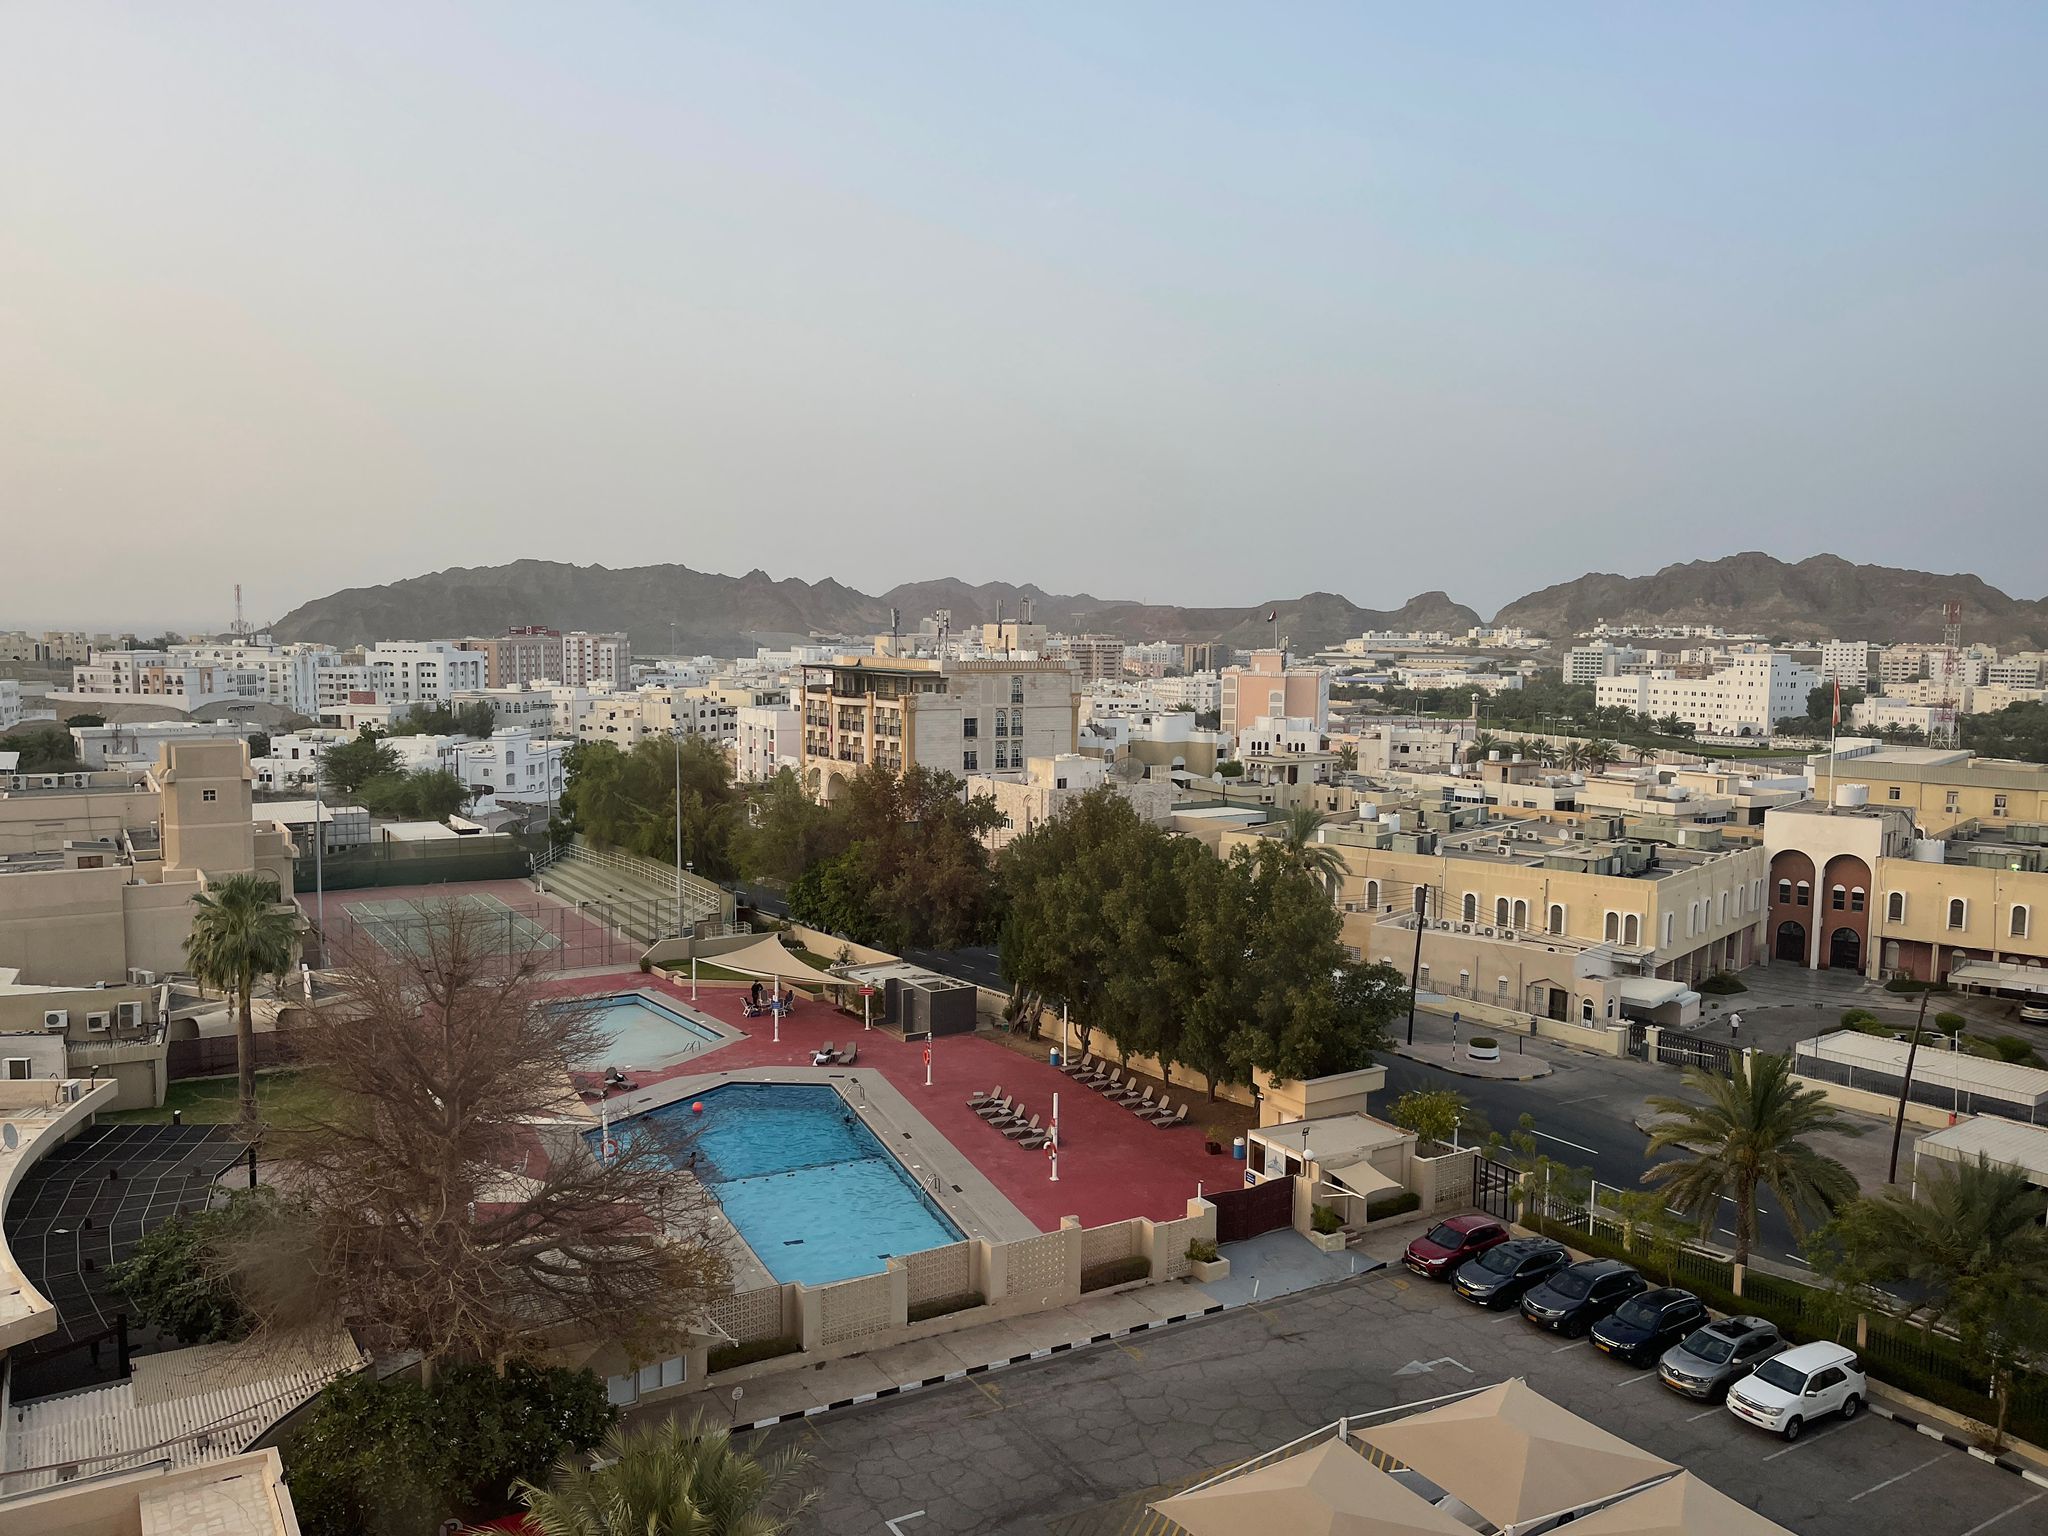 Al-Falaj Hotel is the place to stay in Muscat, Oman